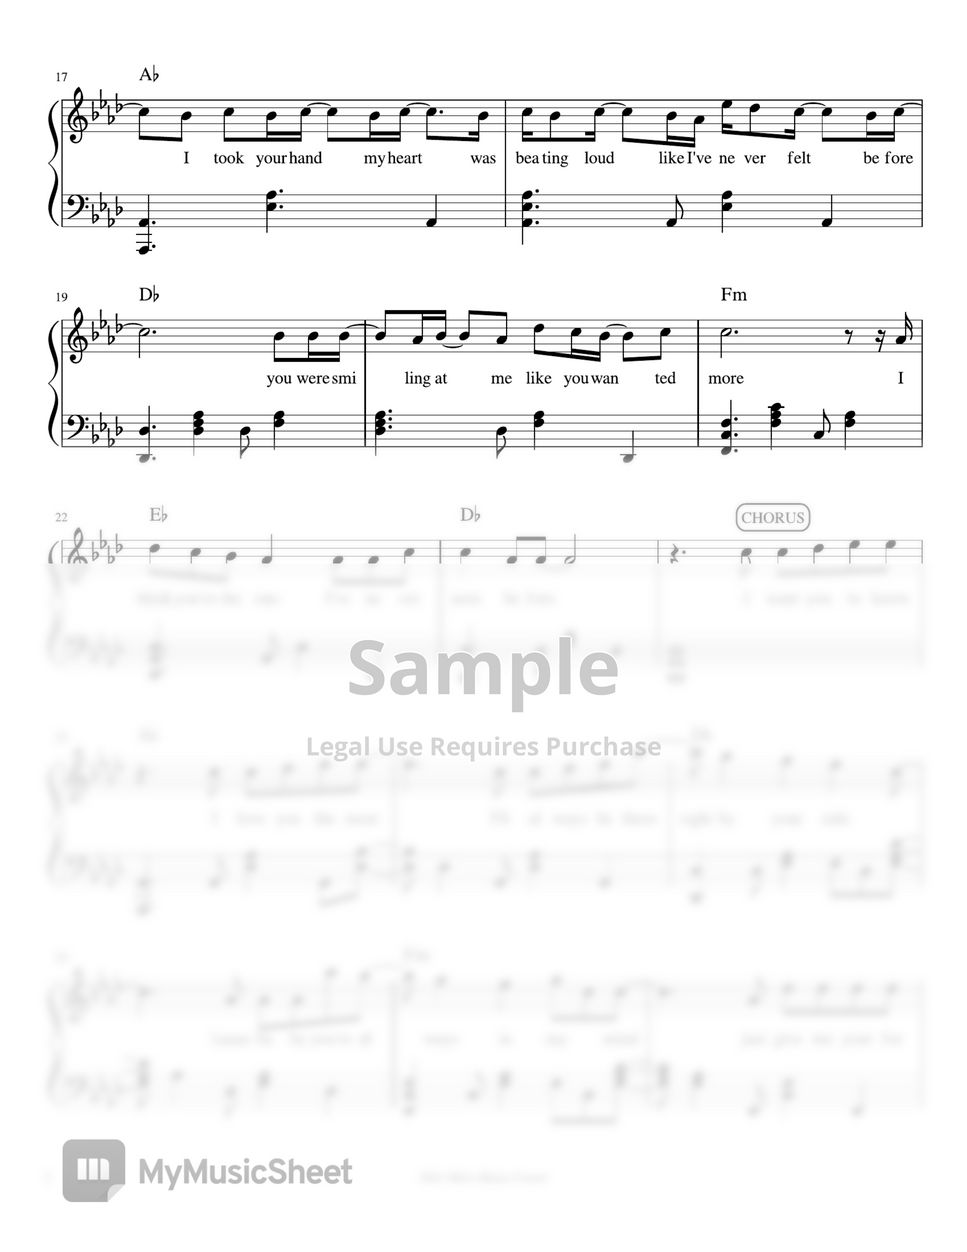 Zack Tabudlo - Give Me Your Forever (piano sheet music) by Mel's Music Corner